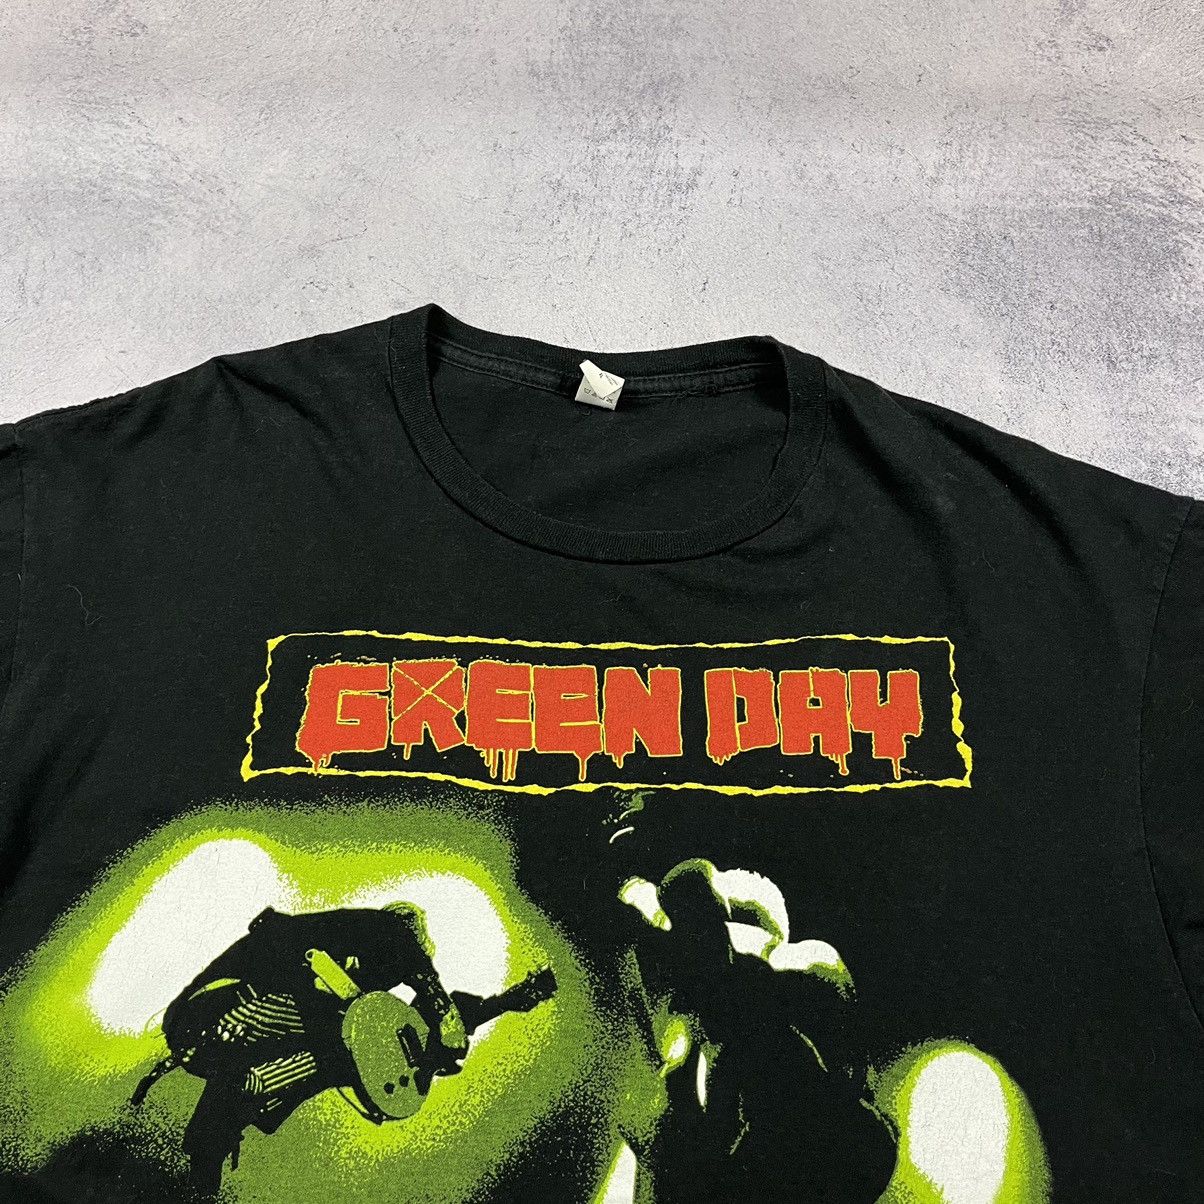 Vintage Vintage Green Day awesome as fuck rock band tee 90’s Size US L / EU 52-54 / 3 - 3 Thumbnail